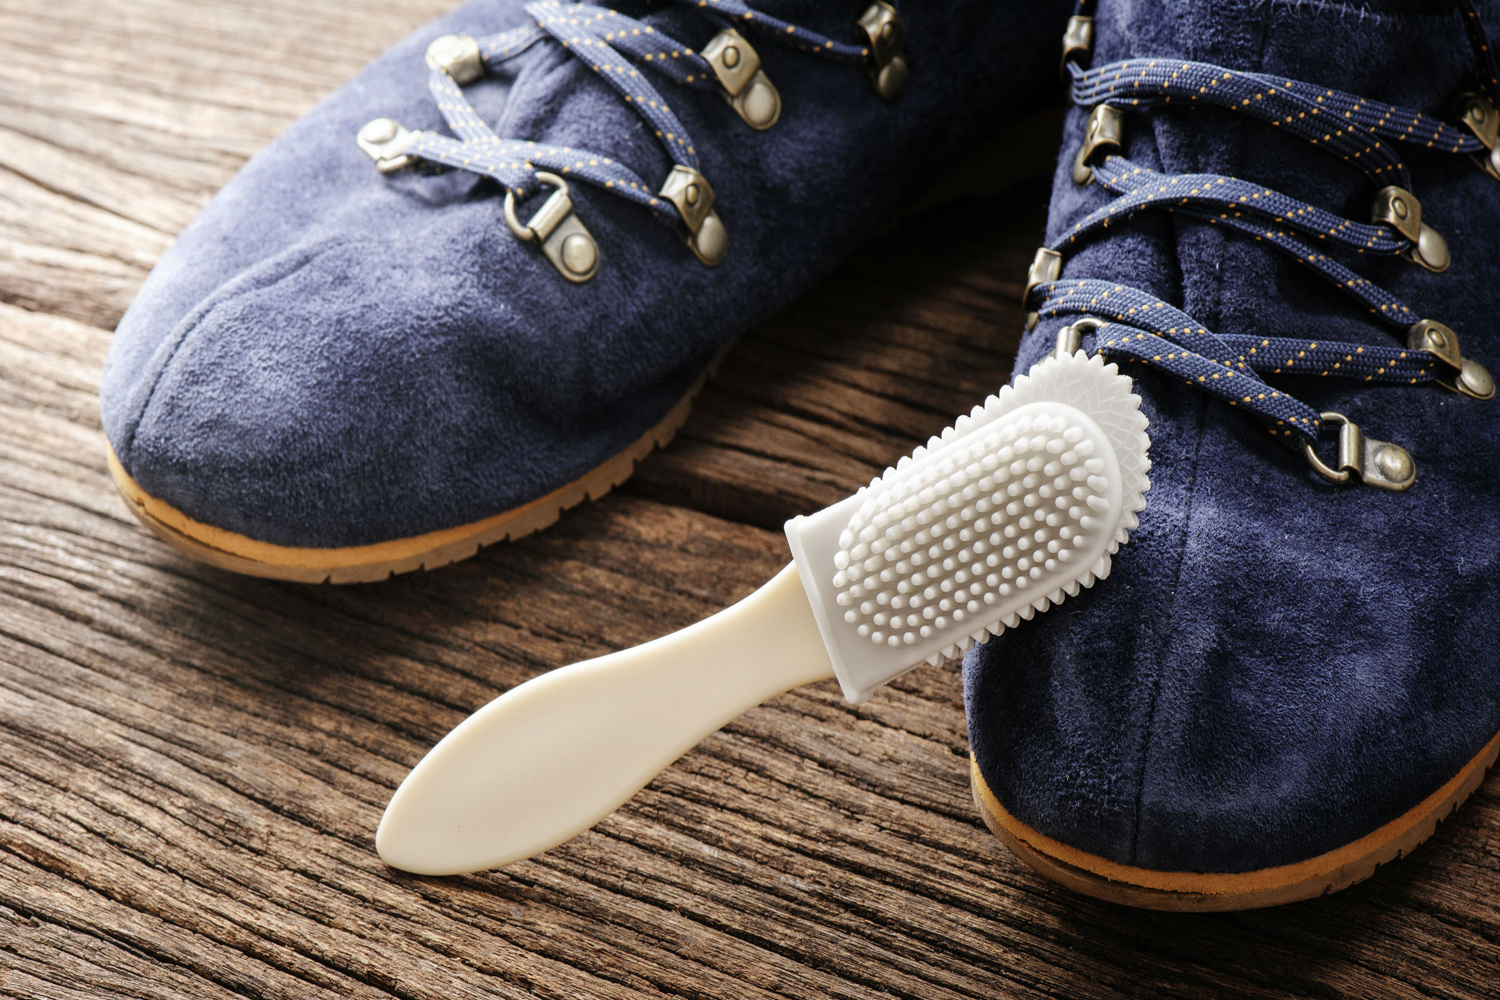 How To Clean Suede Shoes Without Ruining Them Tom's Guide | vlr.eng.br